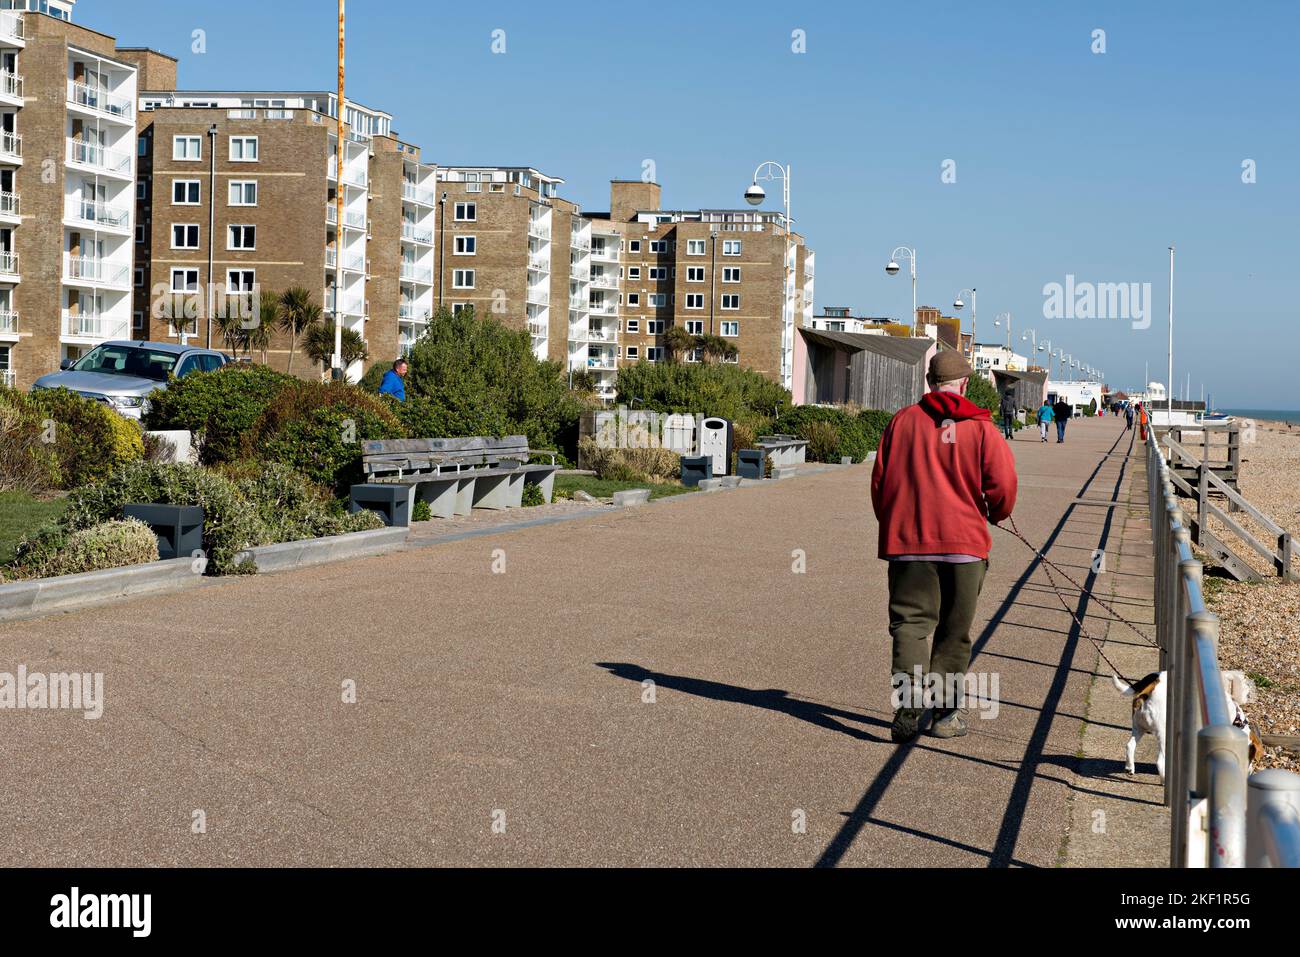 Promenade by the sea at Eastbourne, East Sussex, UK Stock Photo